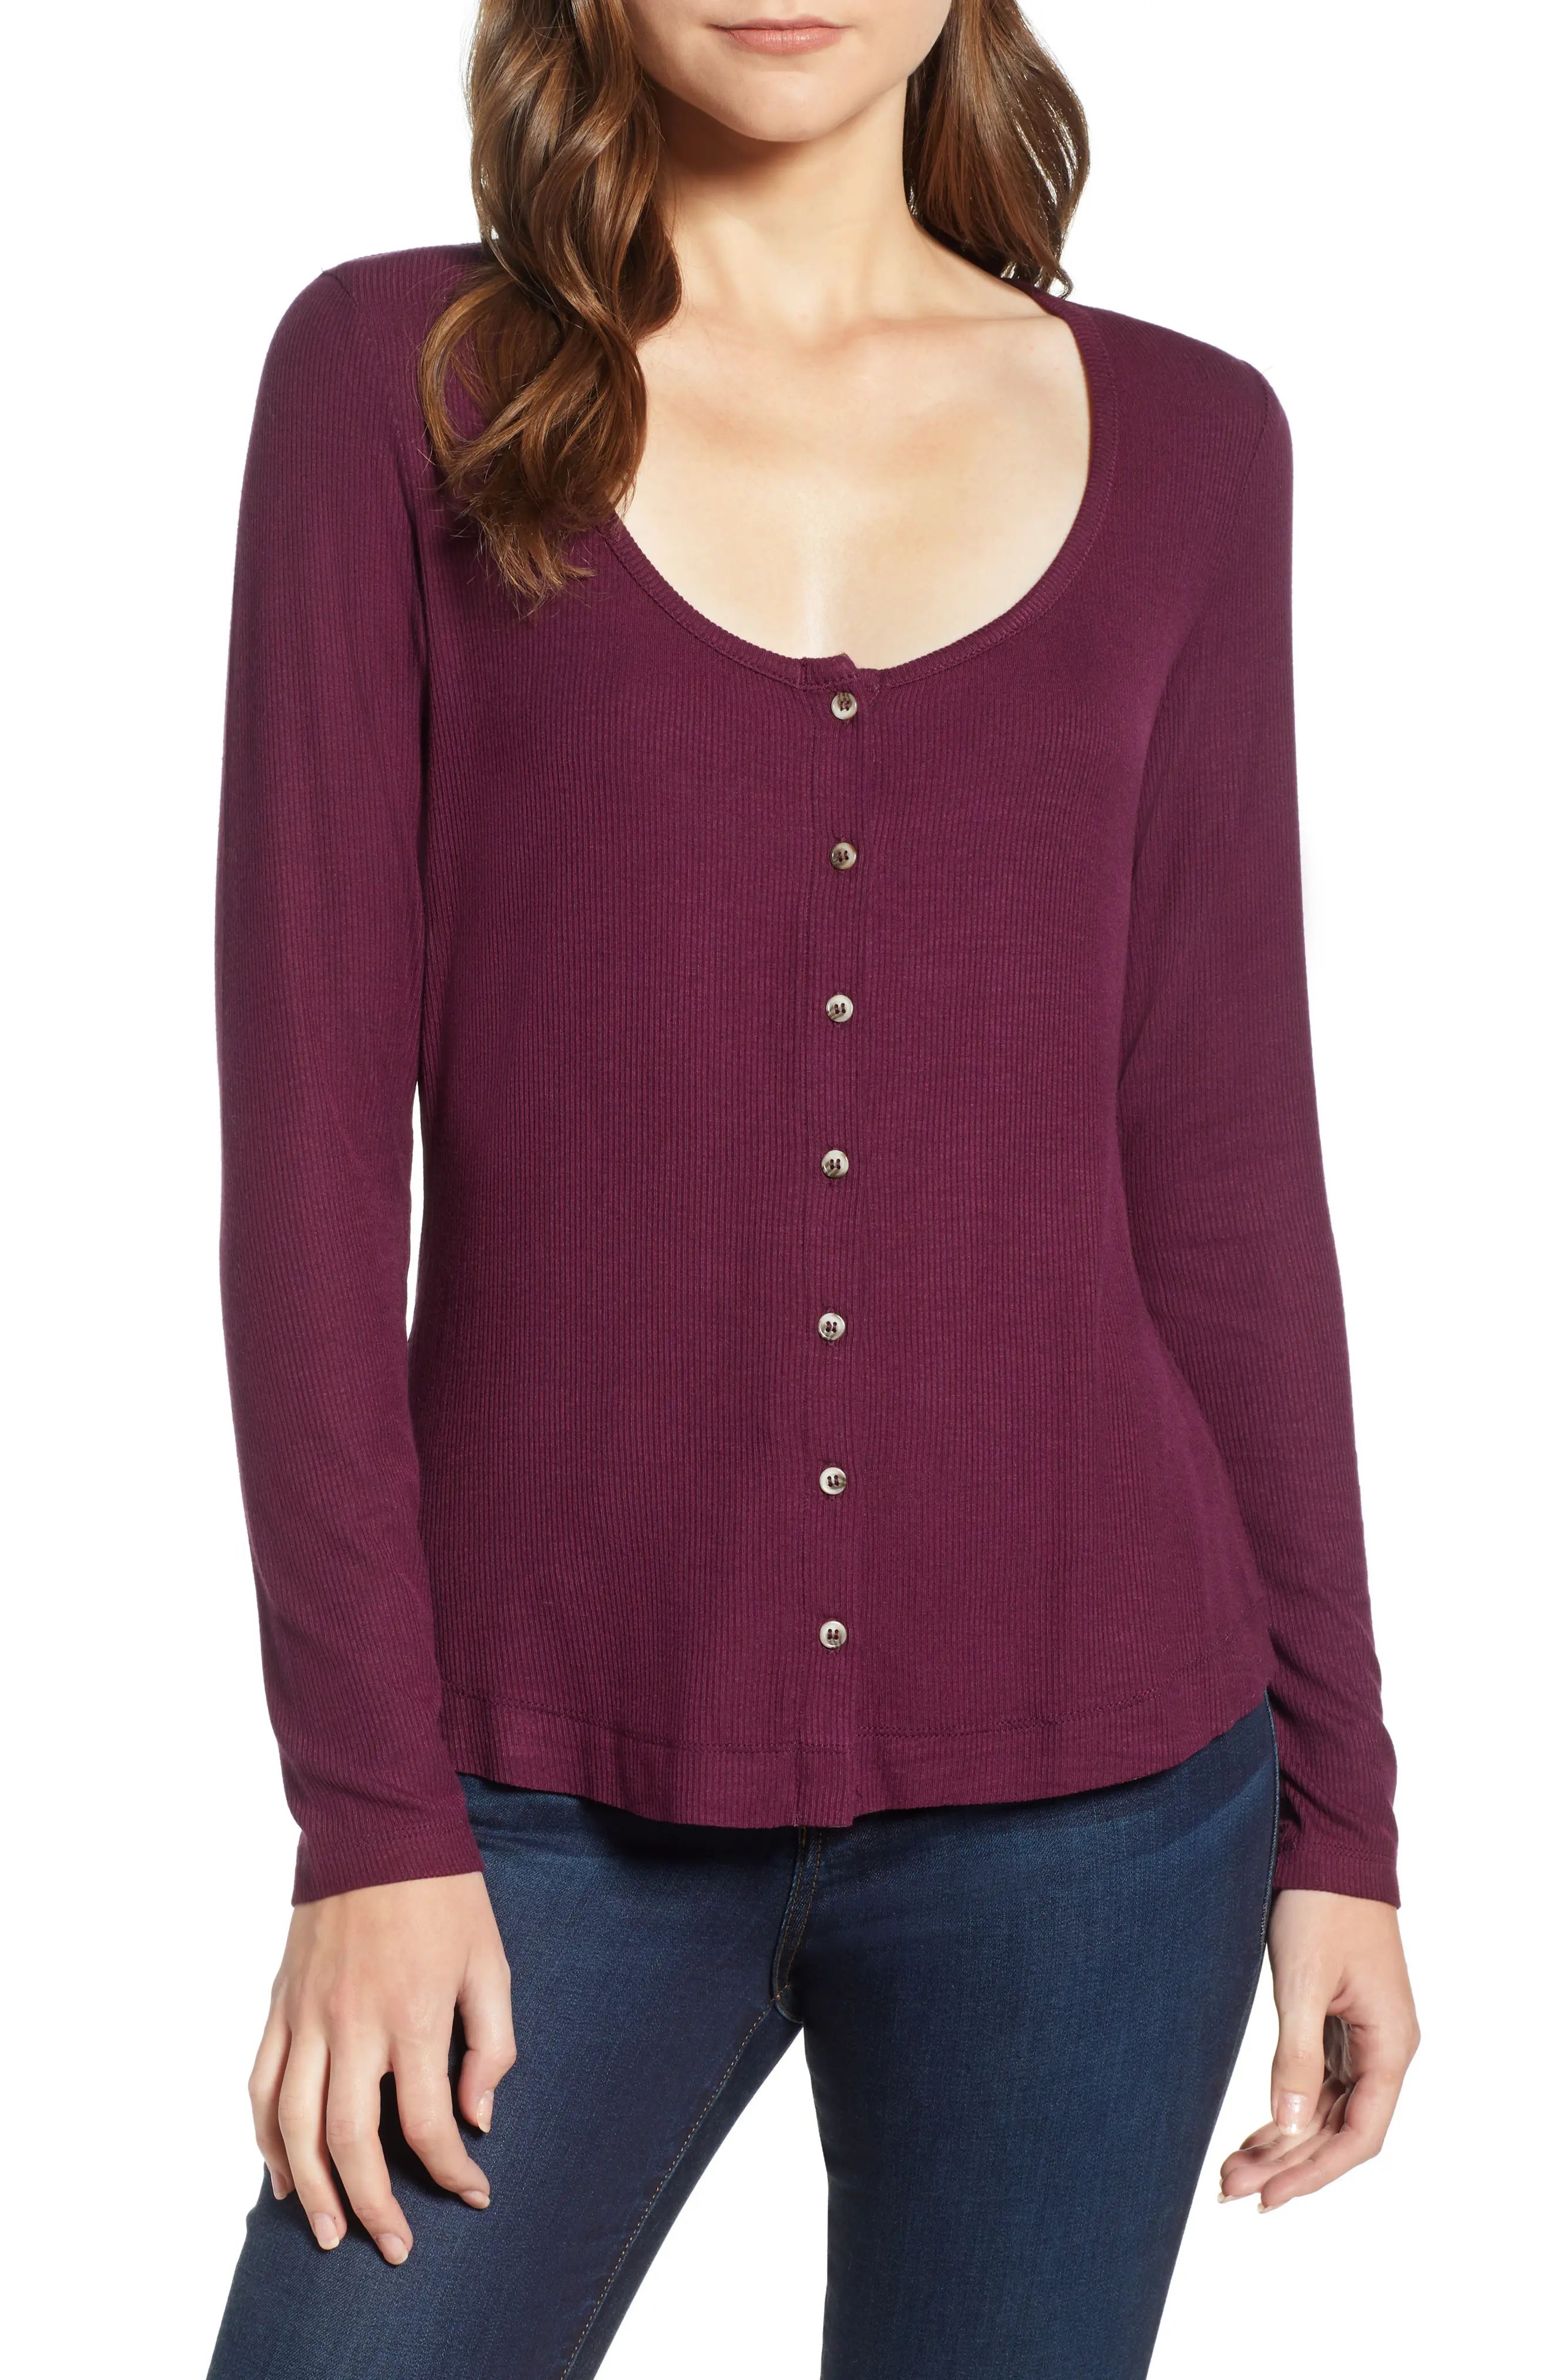 Socialite Button Front Top | Nordstrom